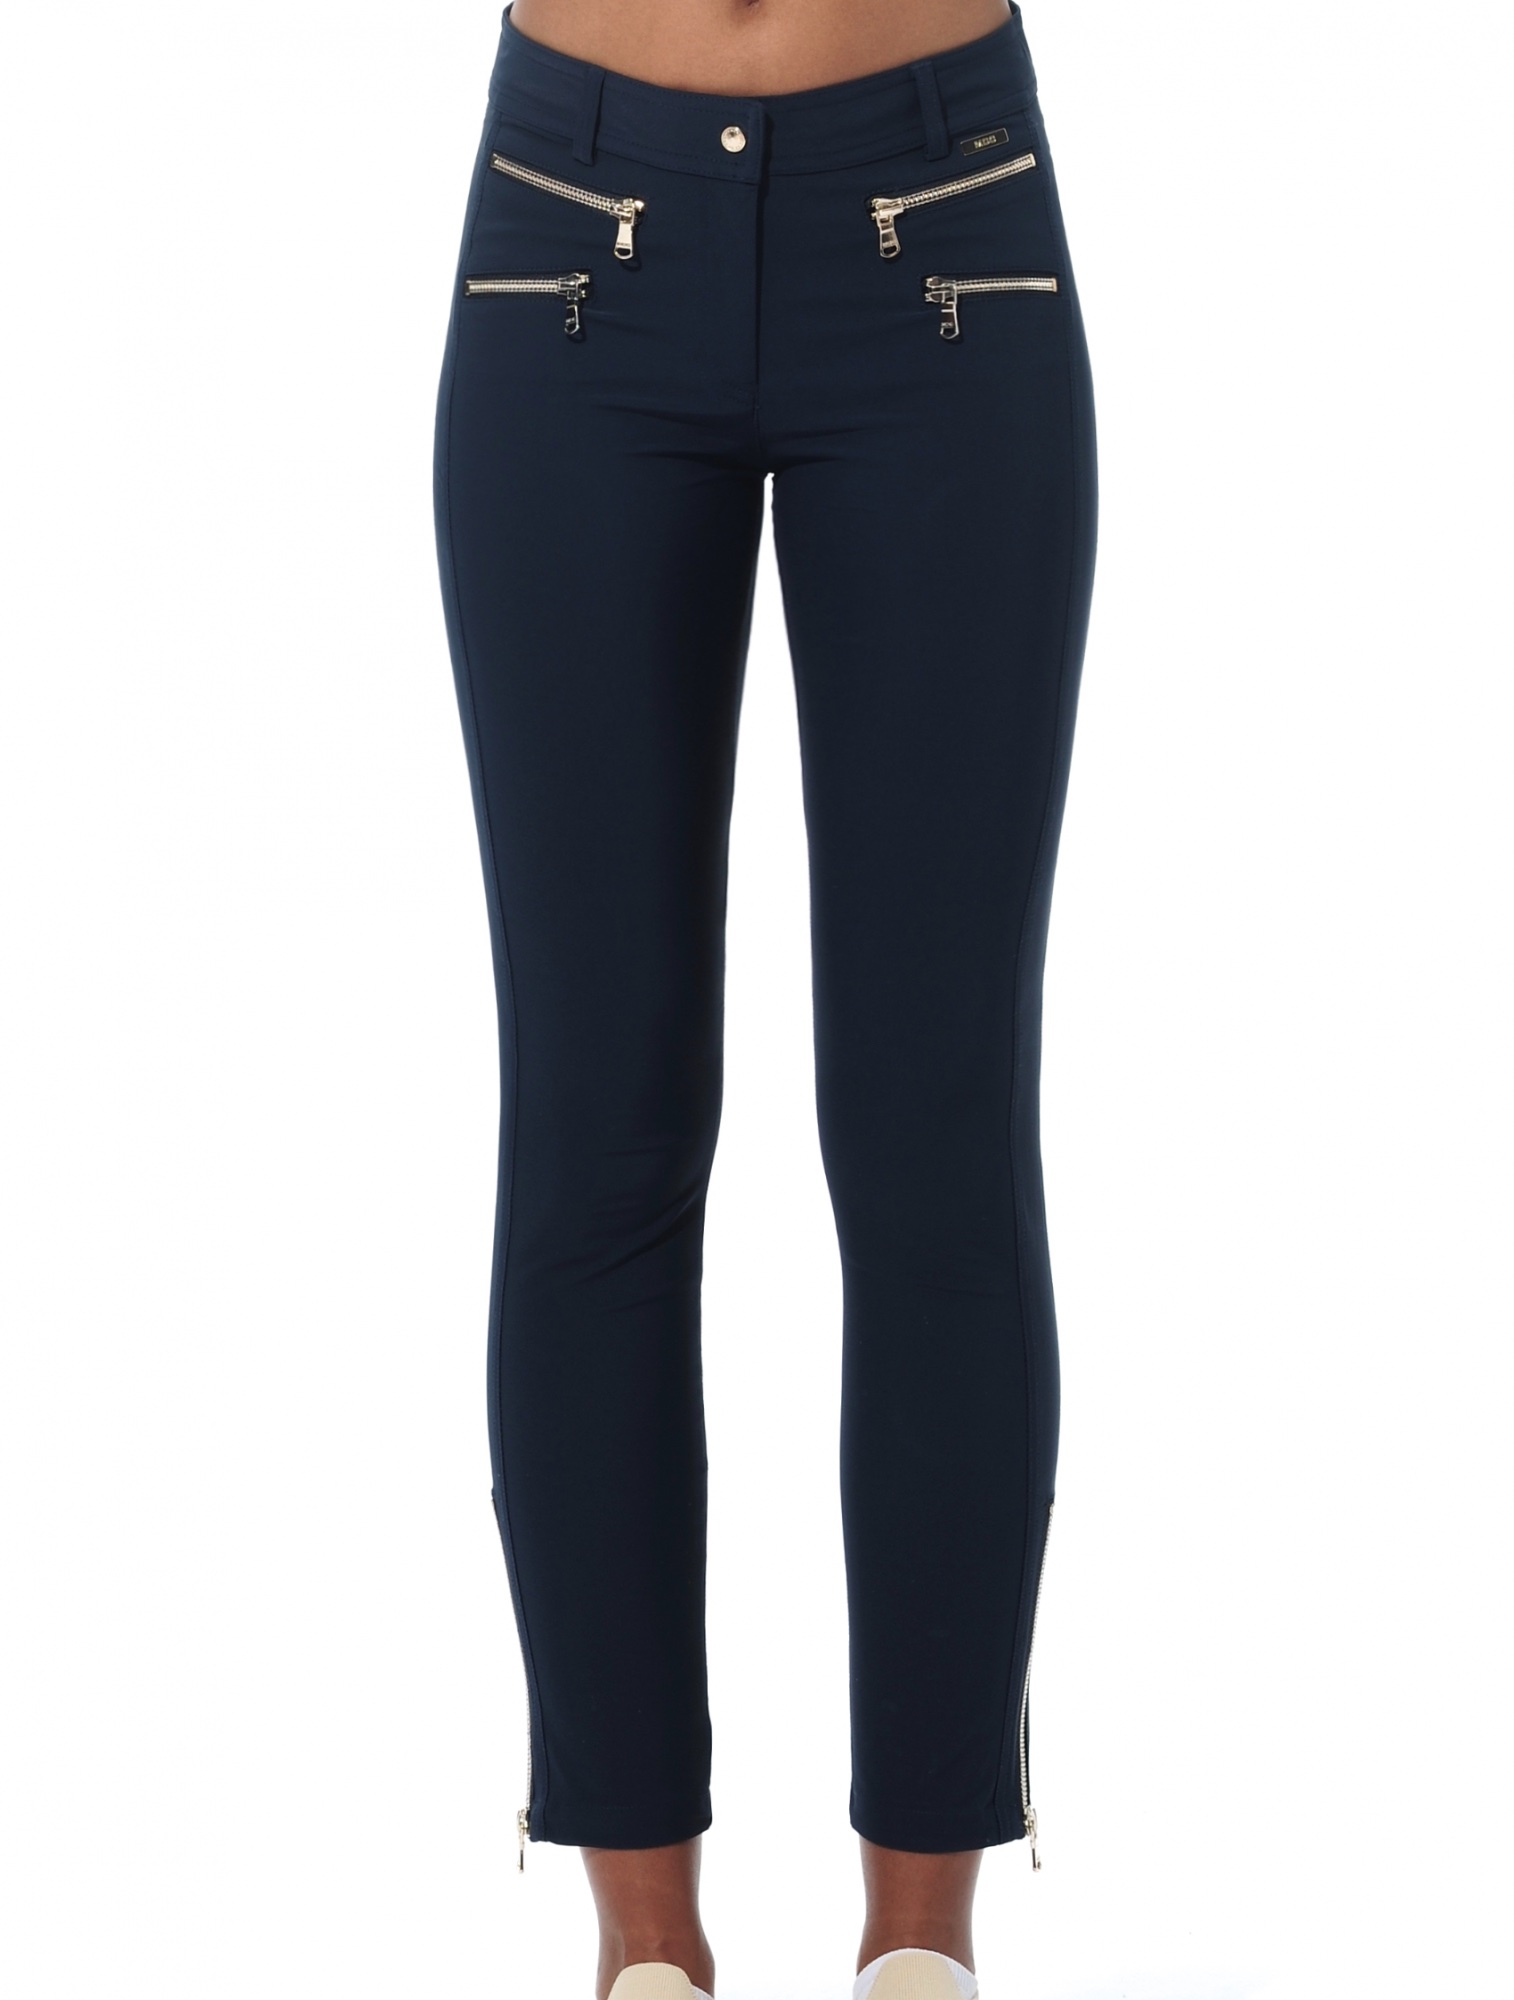 4way stretch double zip ankle pants navy 